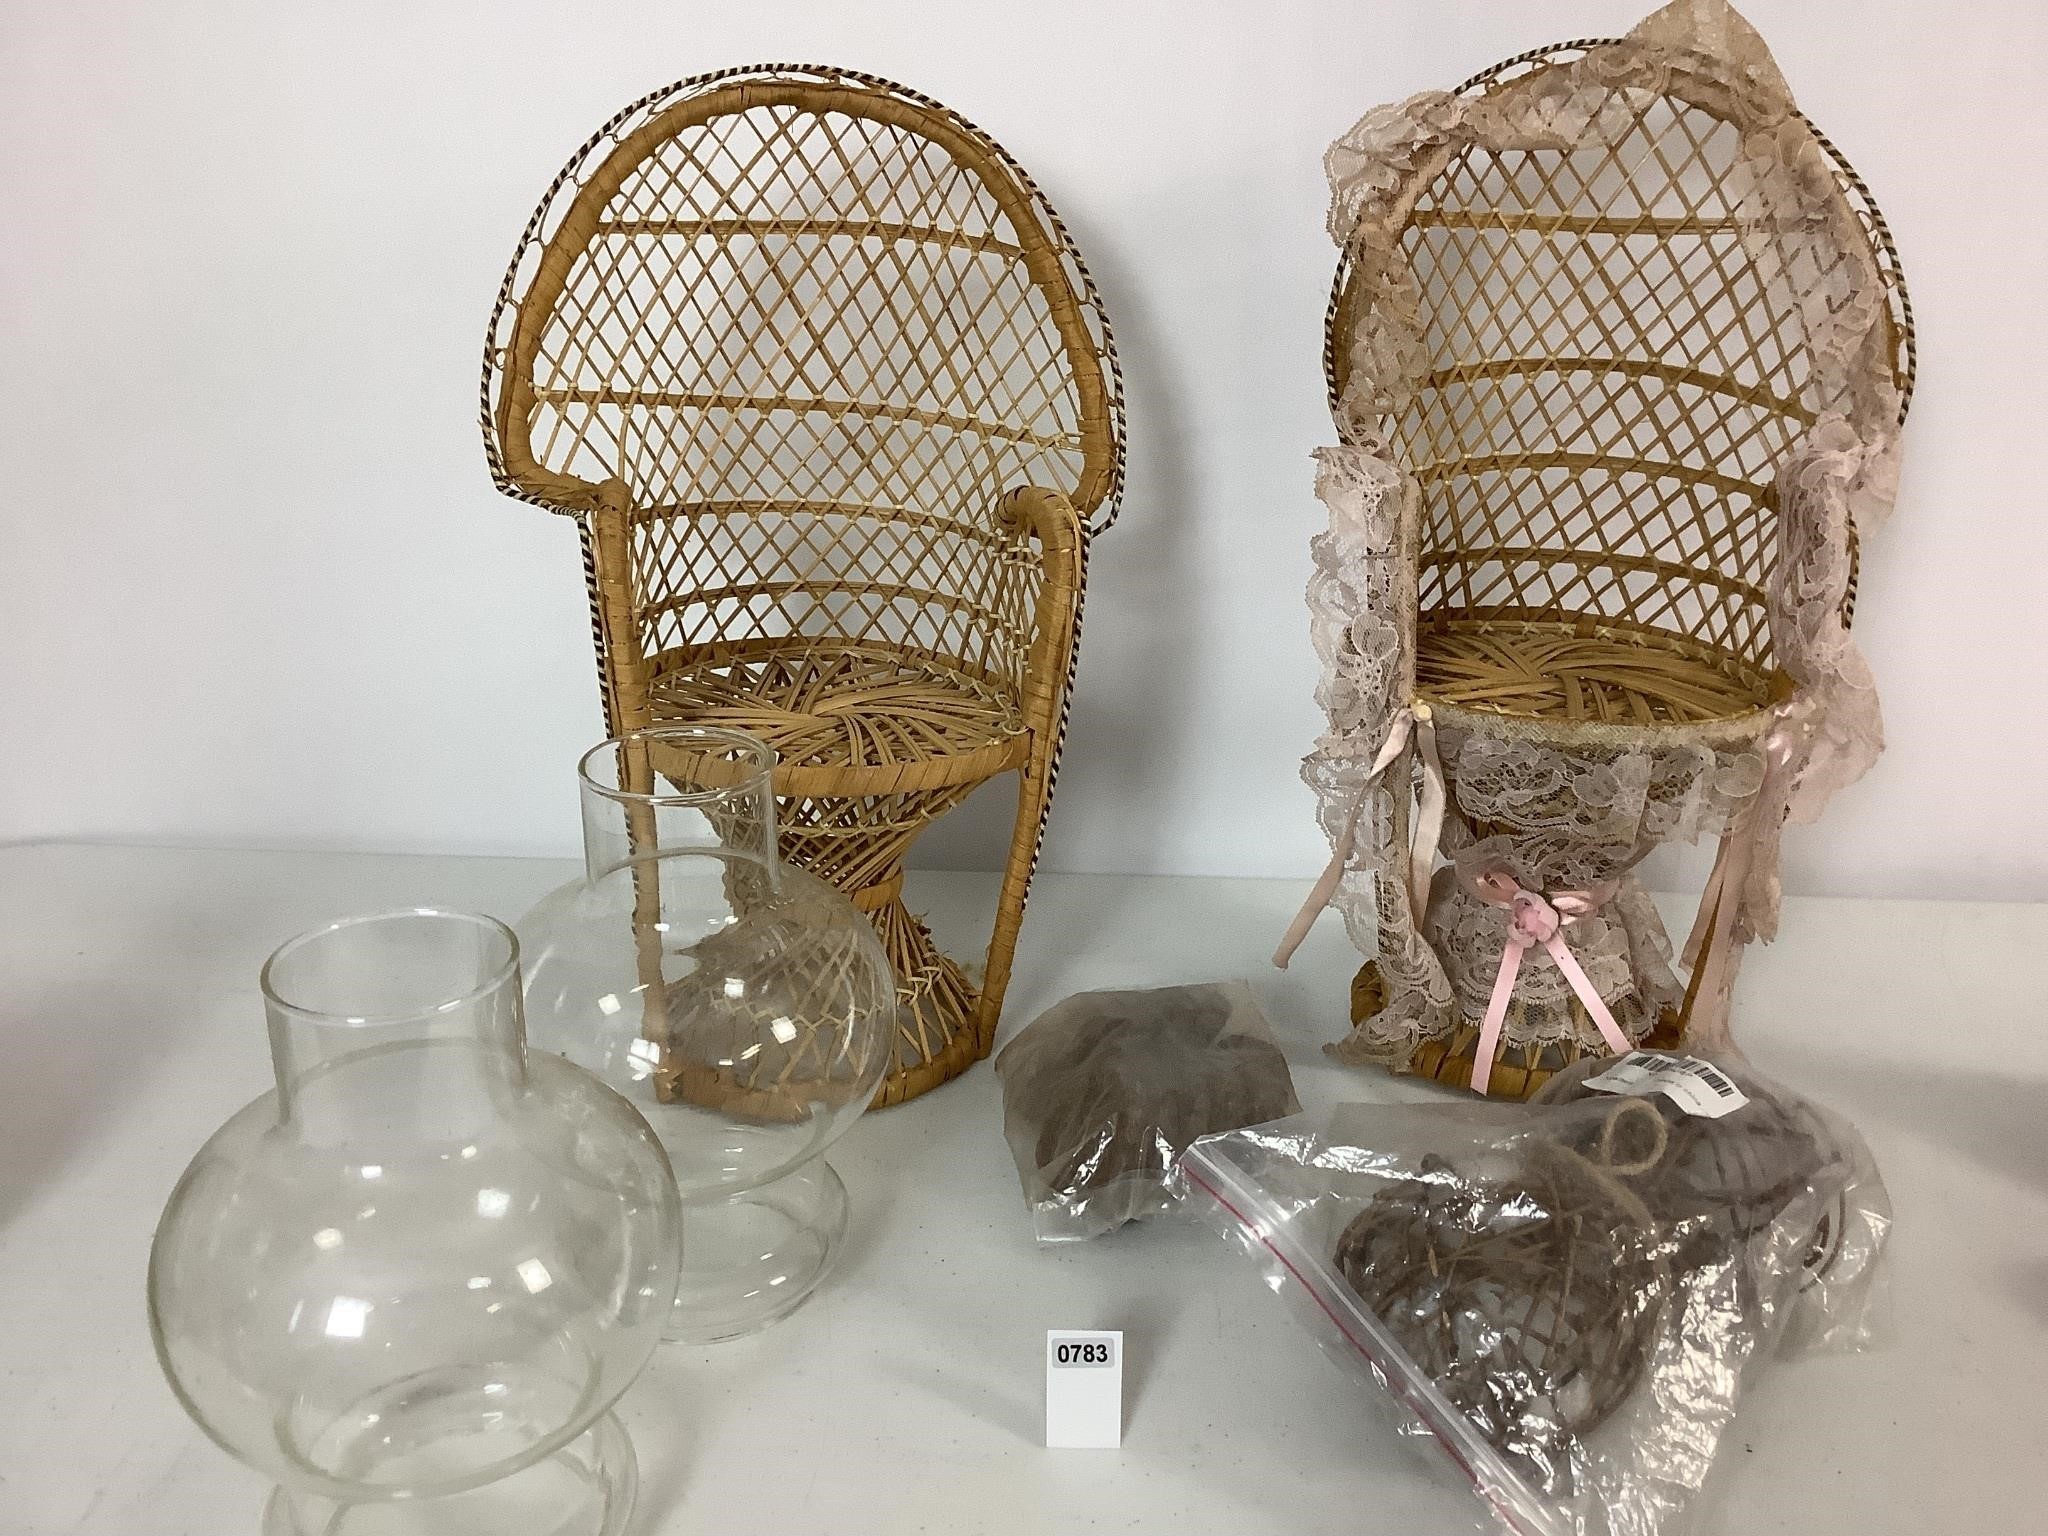 2 WICKER CHAIRS(17 1/2") GLOBES, MORE